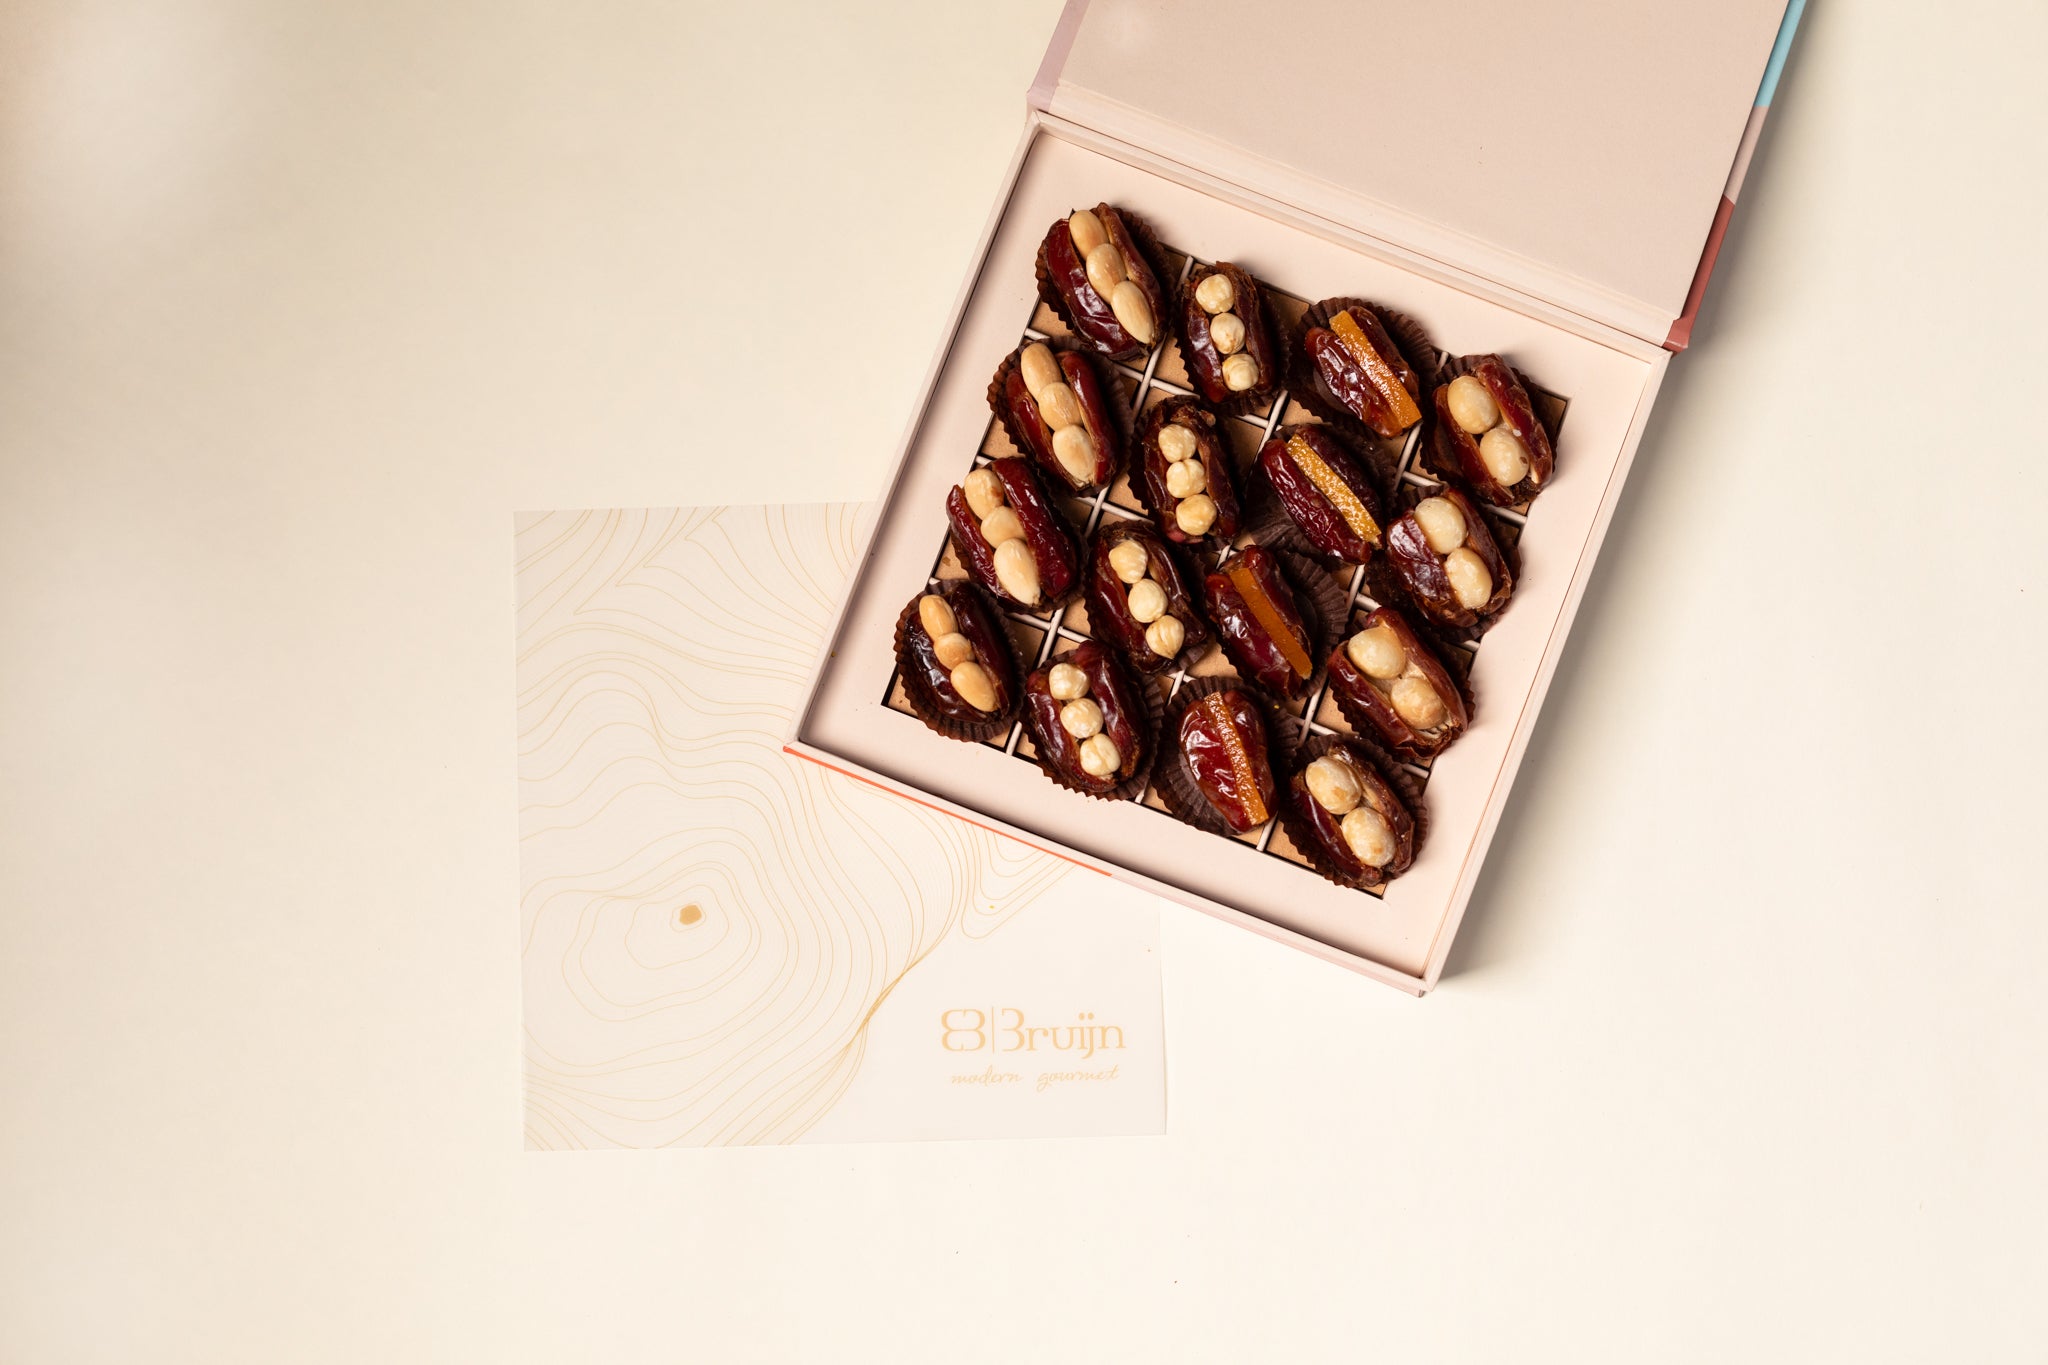 Candid box with assorted stuffed dates best as a birthday or anniversary gift